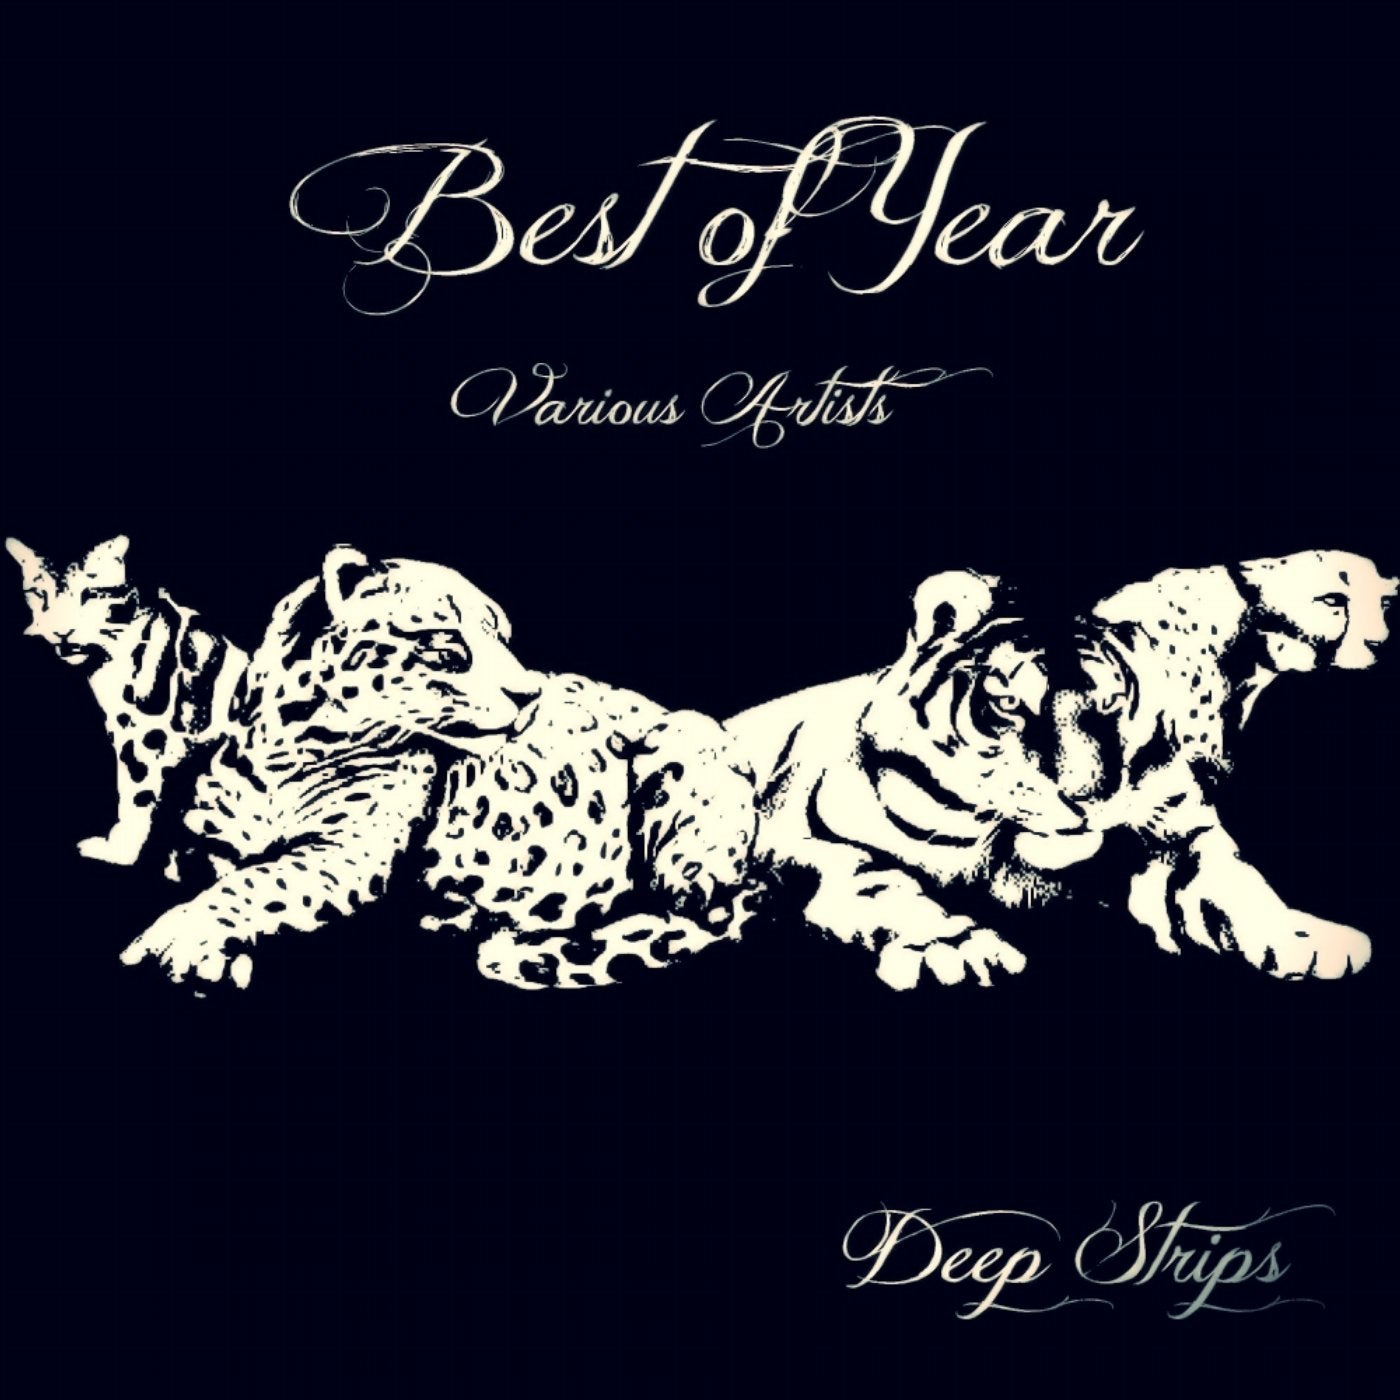 Best of Year